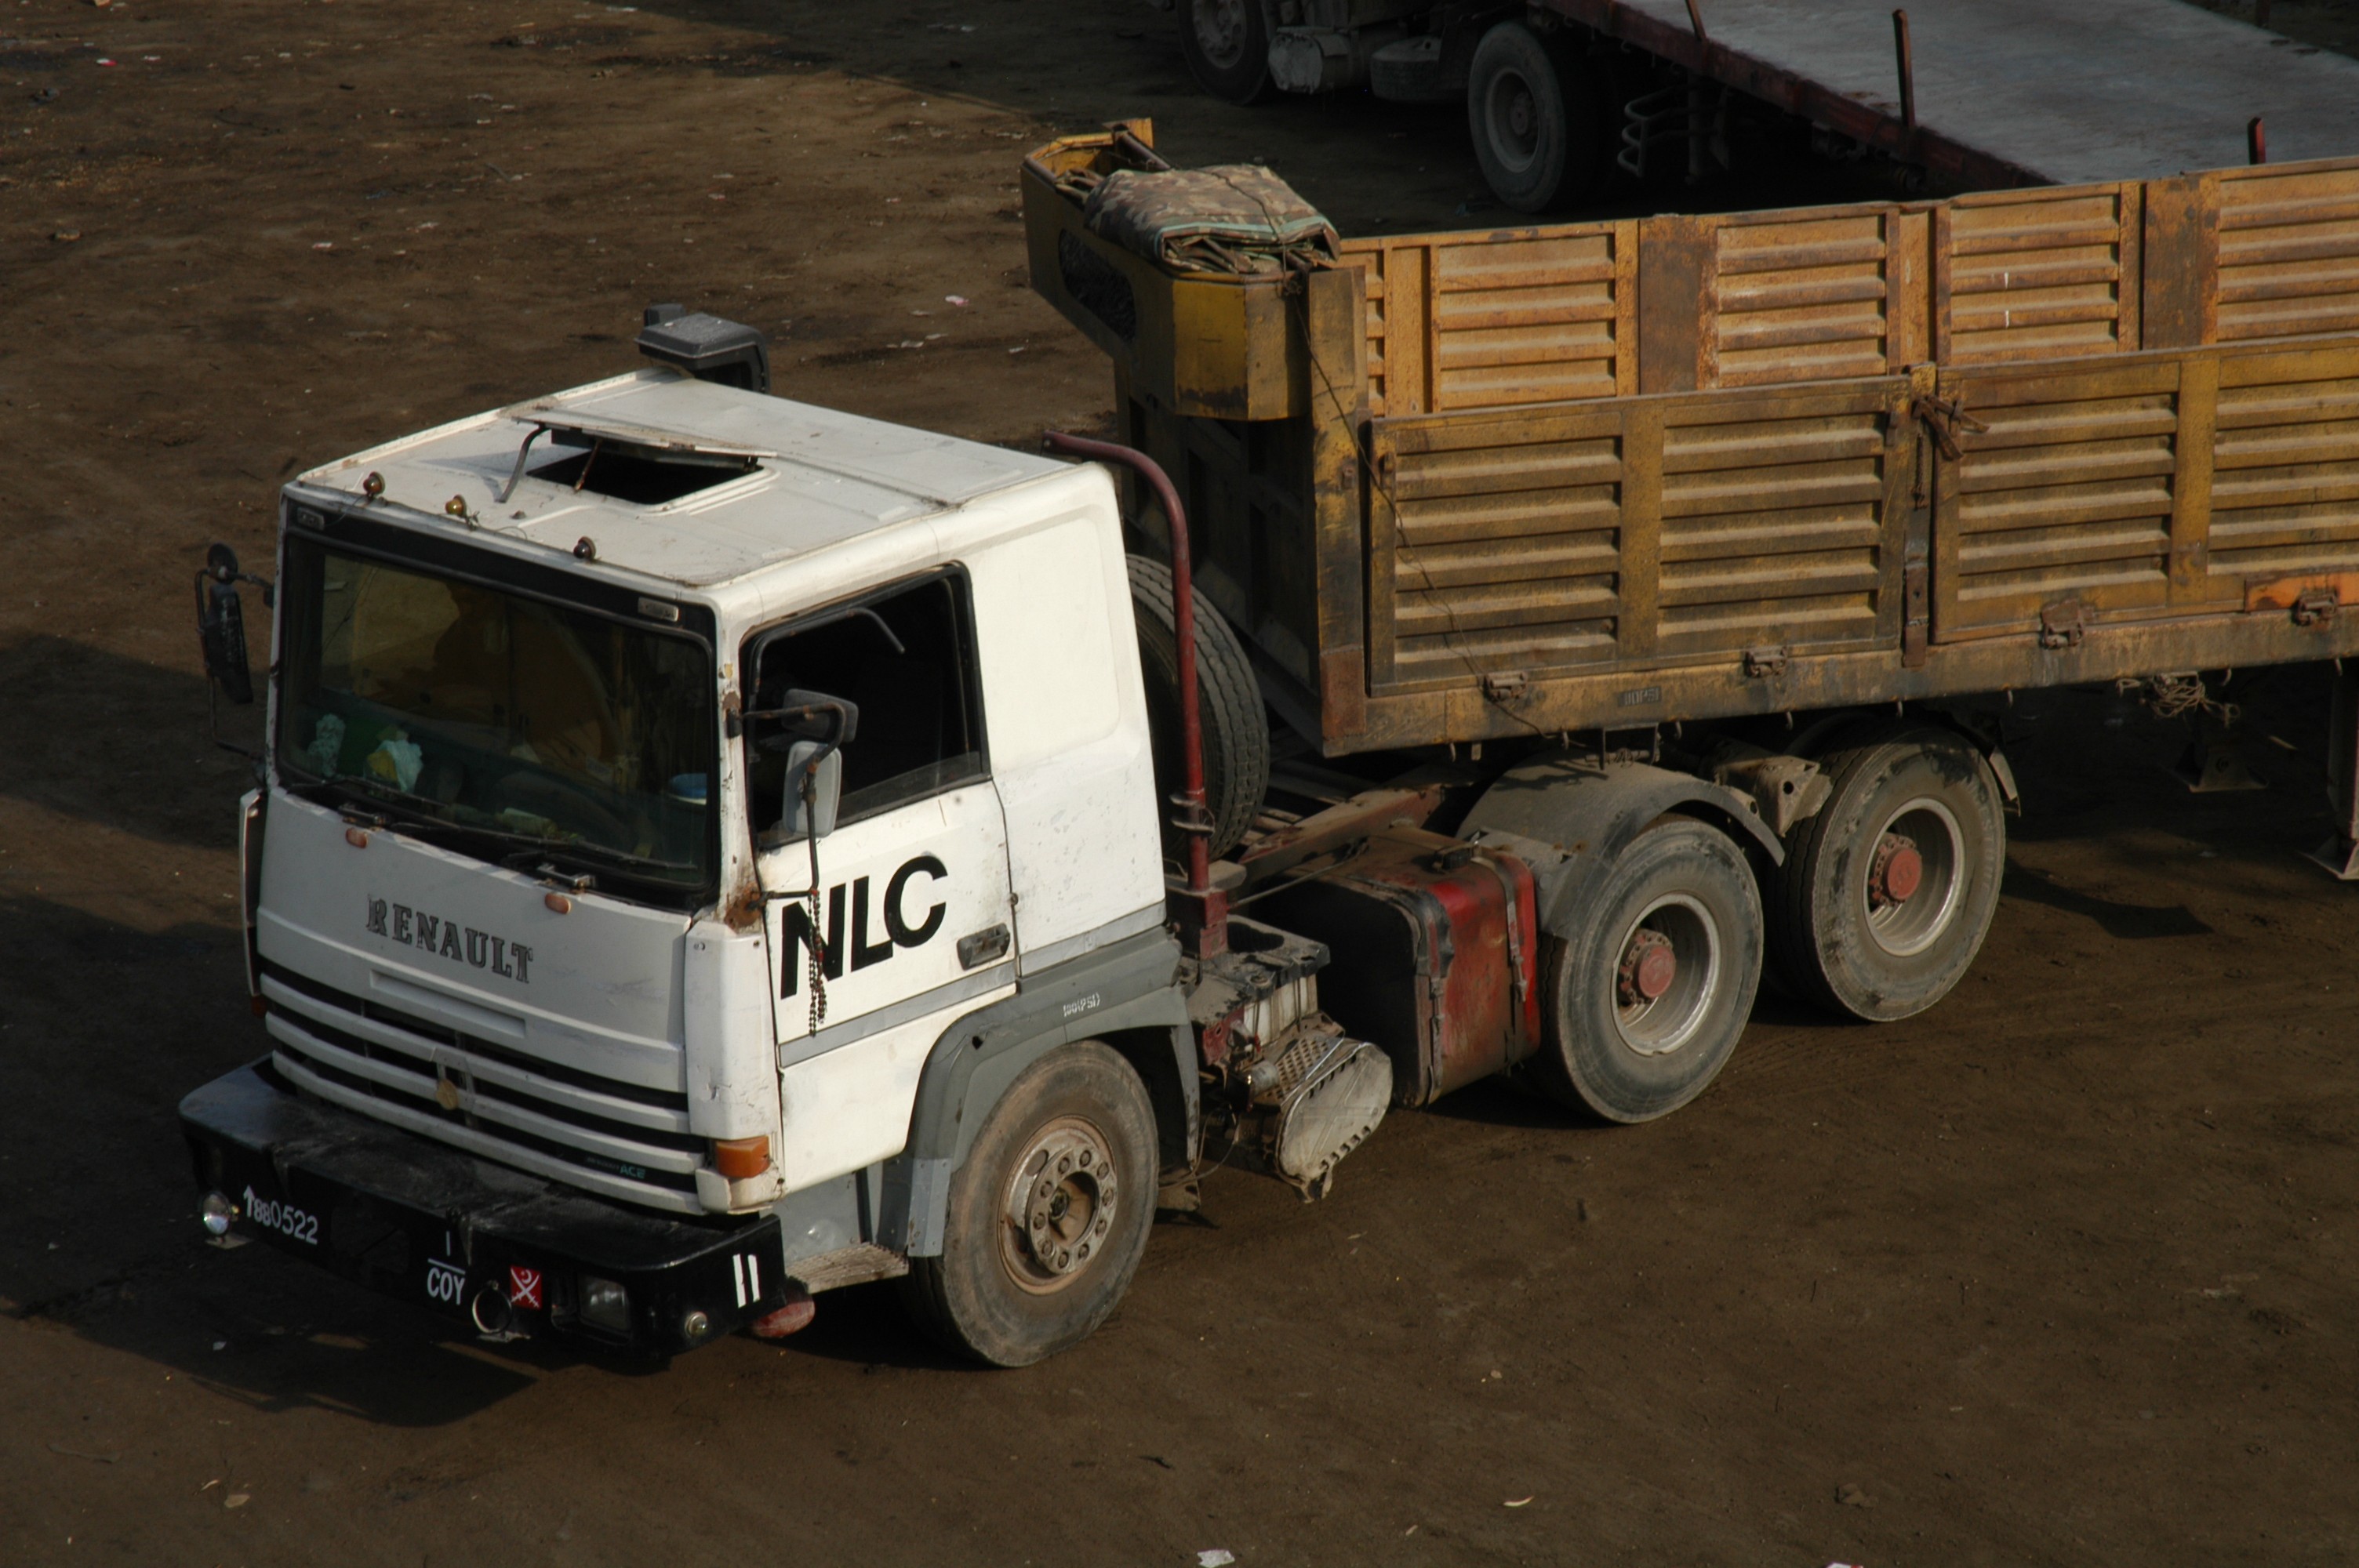 The Cargo Truck of NLC (National Logistics Corporation)